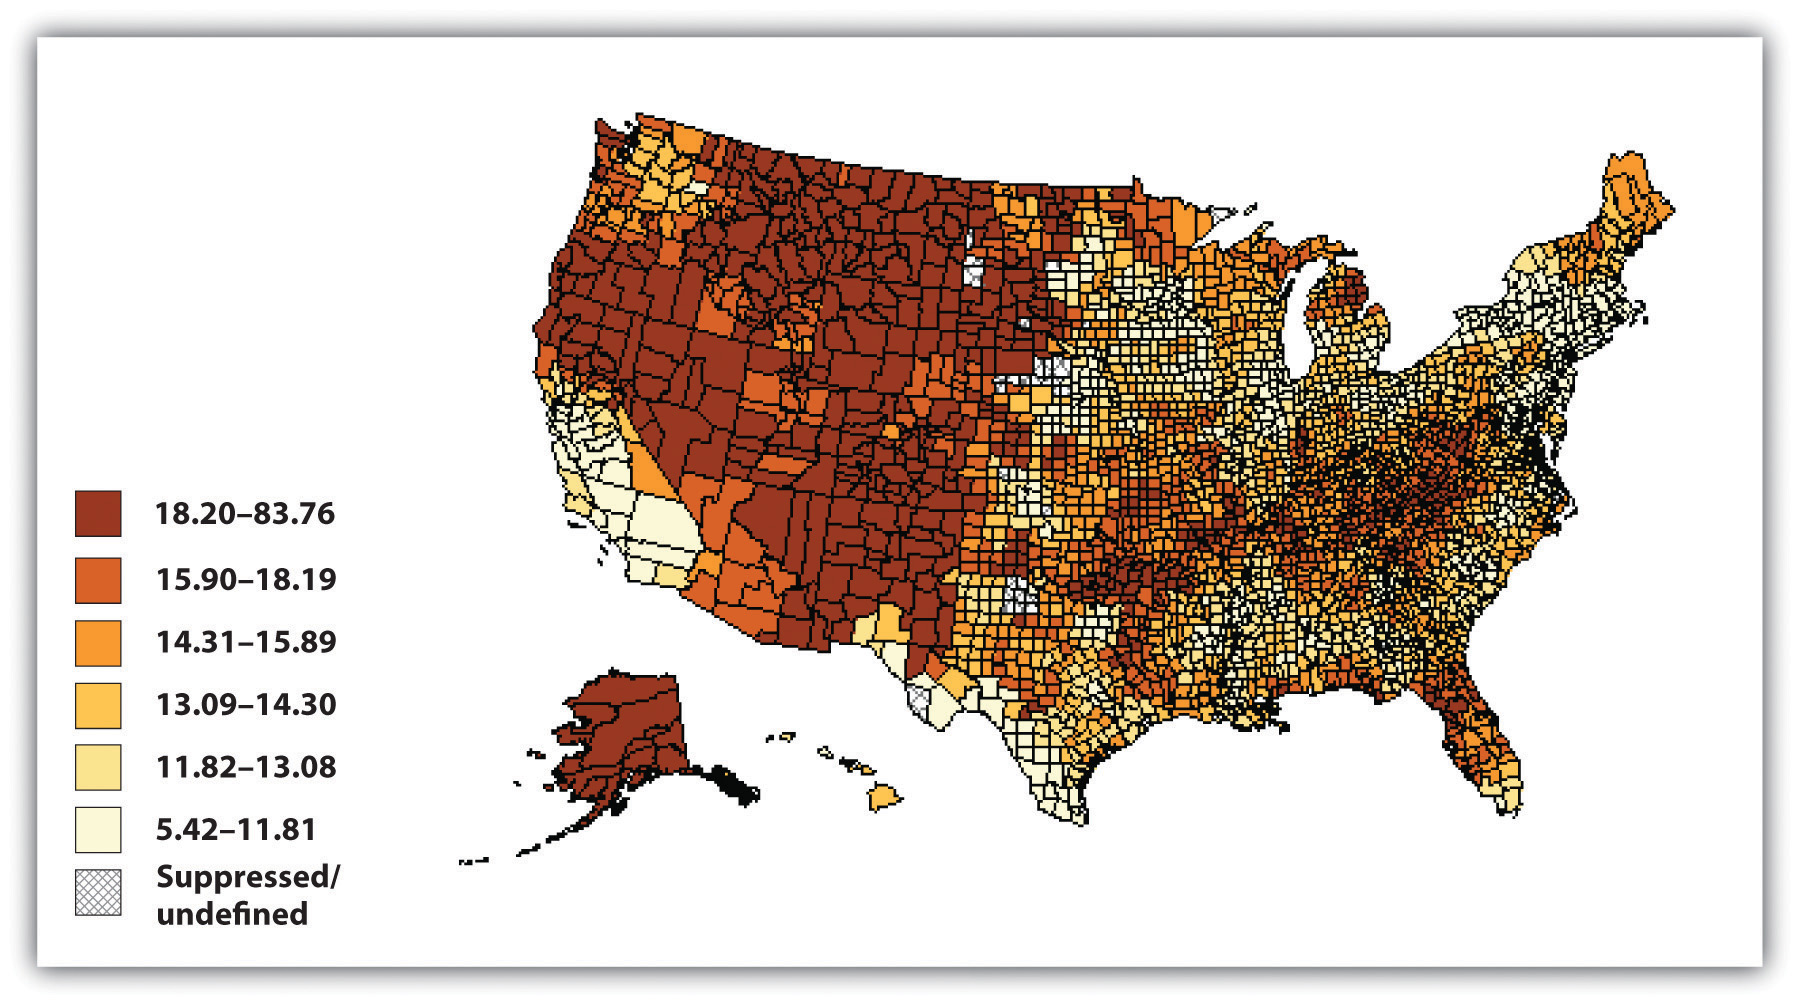 US Suicide Rates, 2000-2006. The highest rates of suicide are in Alaska and the western half of the US, besides much of California